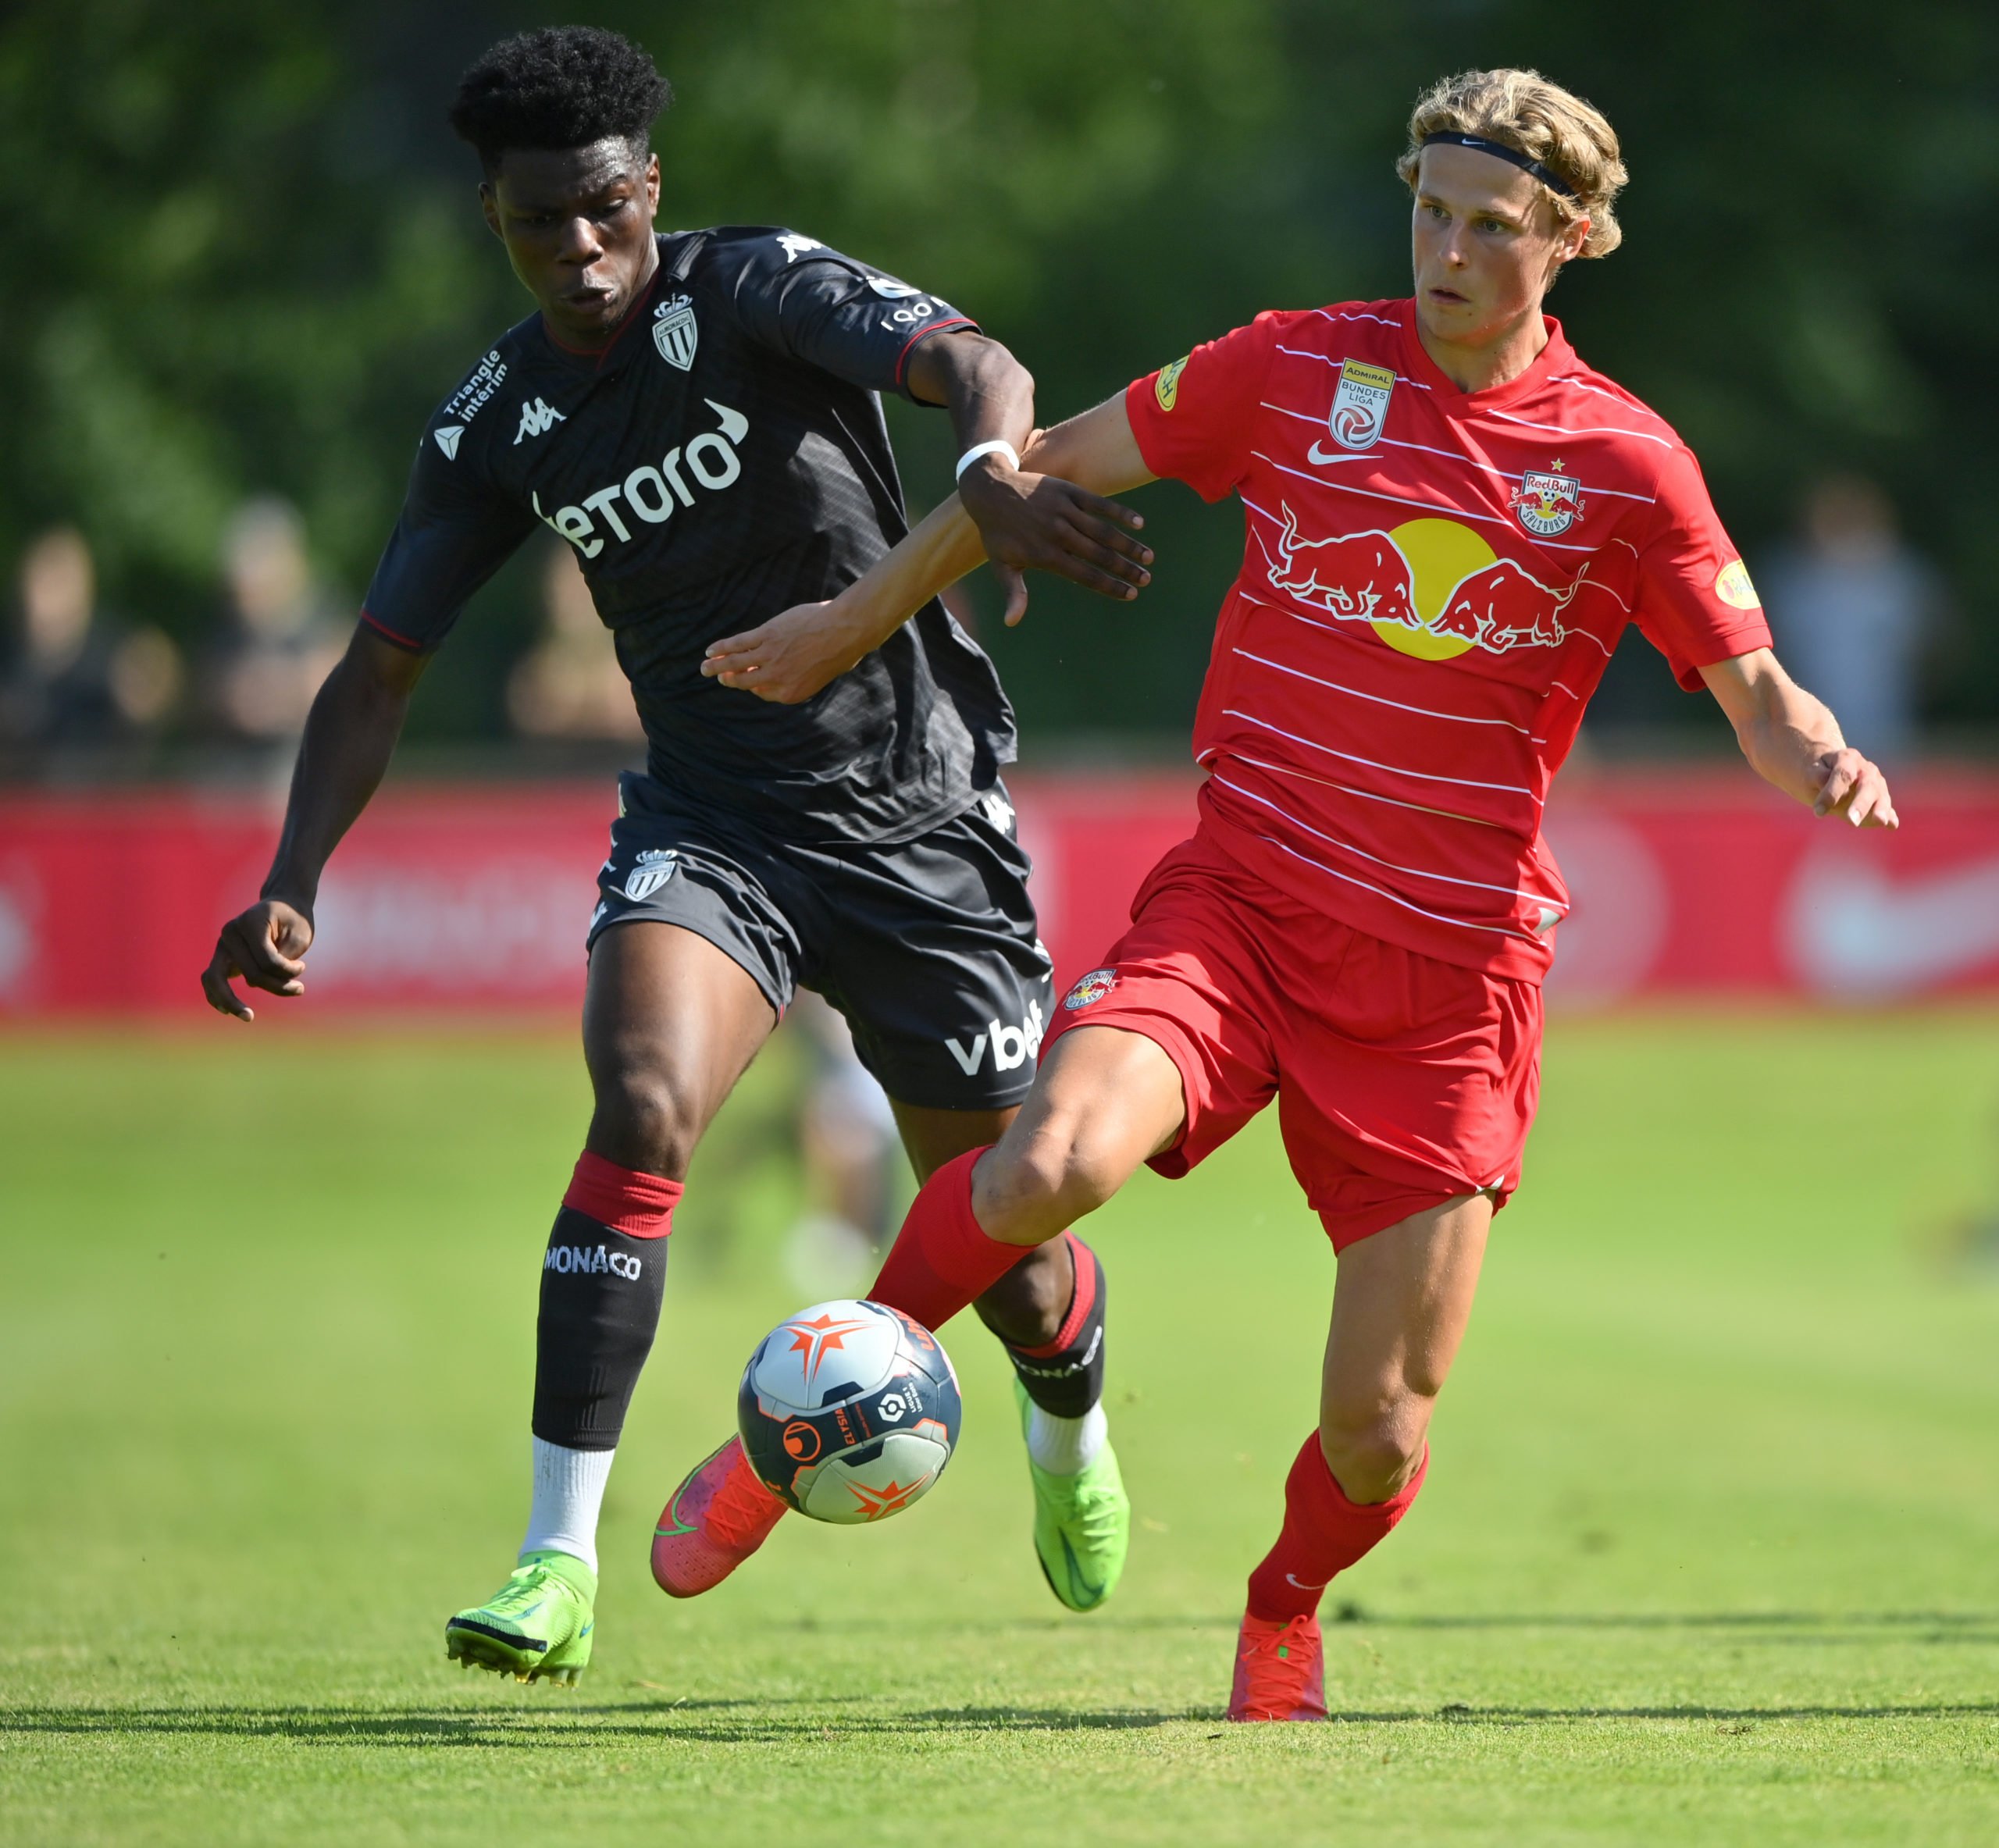 ANIF, AUSTRIA - JULY 03: Aurelien Tchouameni of AS Monaco and Maurits Kjaergaard of FC Red Bull Salzburg compete for the ball  during the Pre-Season Friendly match between FC Red Bull Salzburg and AS Monaco at Maximarkt Sportpark on July 03, 2021 in Anif, Austria. (Photo by Sebastian Widmann/Getty Images)The 4th Official uses images provided by the following image agency: Getty Images (https://www.gettyimages.de/) Imago Images (https://www.imago-images.de/)